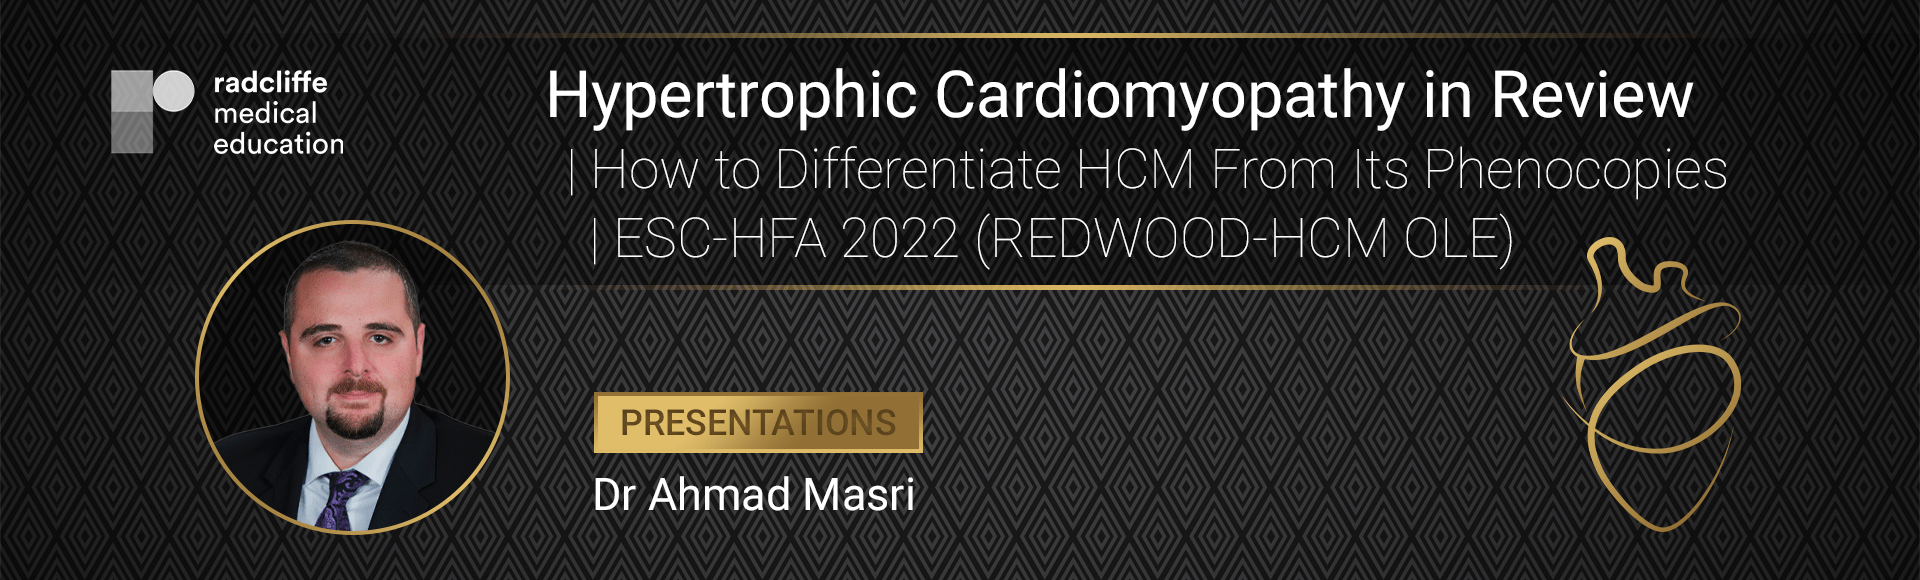 HCM in Review: ESC–HFA 2022 & How to Differentiate HCM From Its Phenocopies